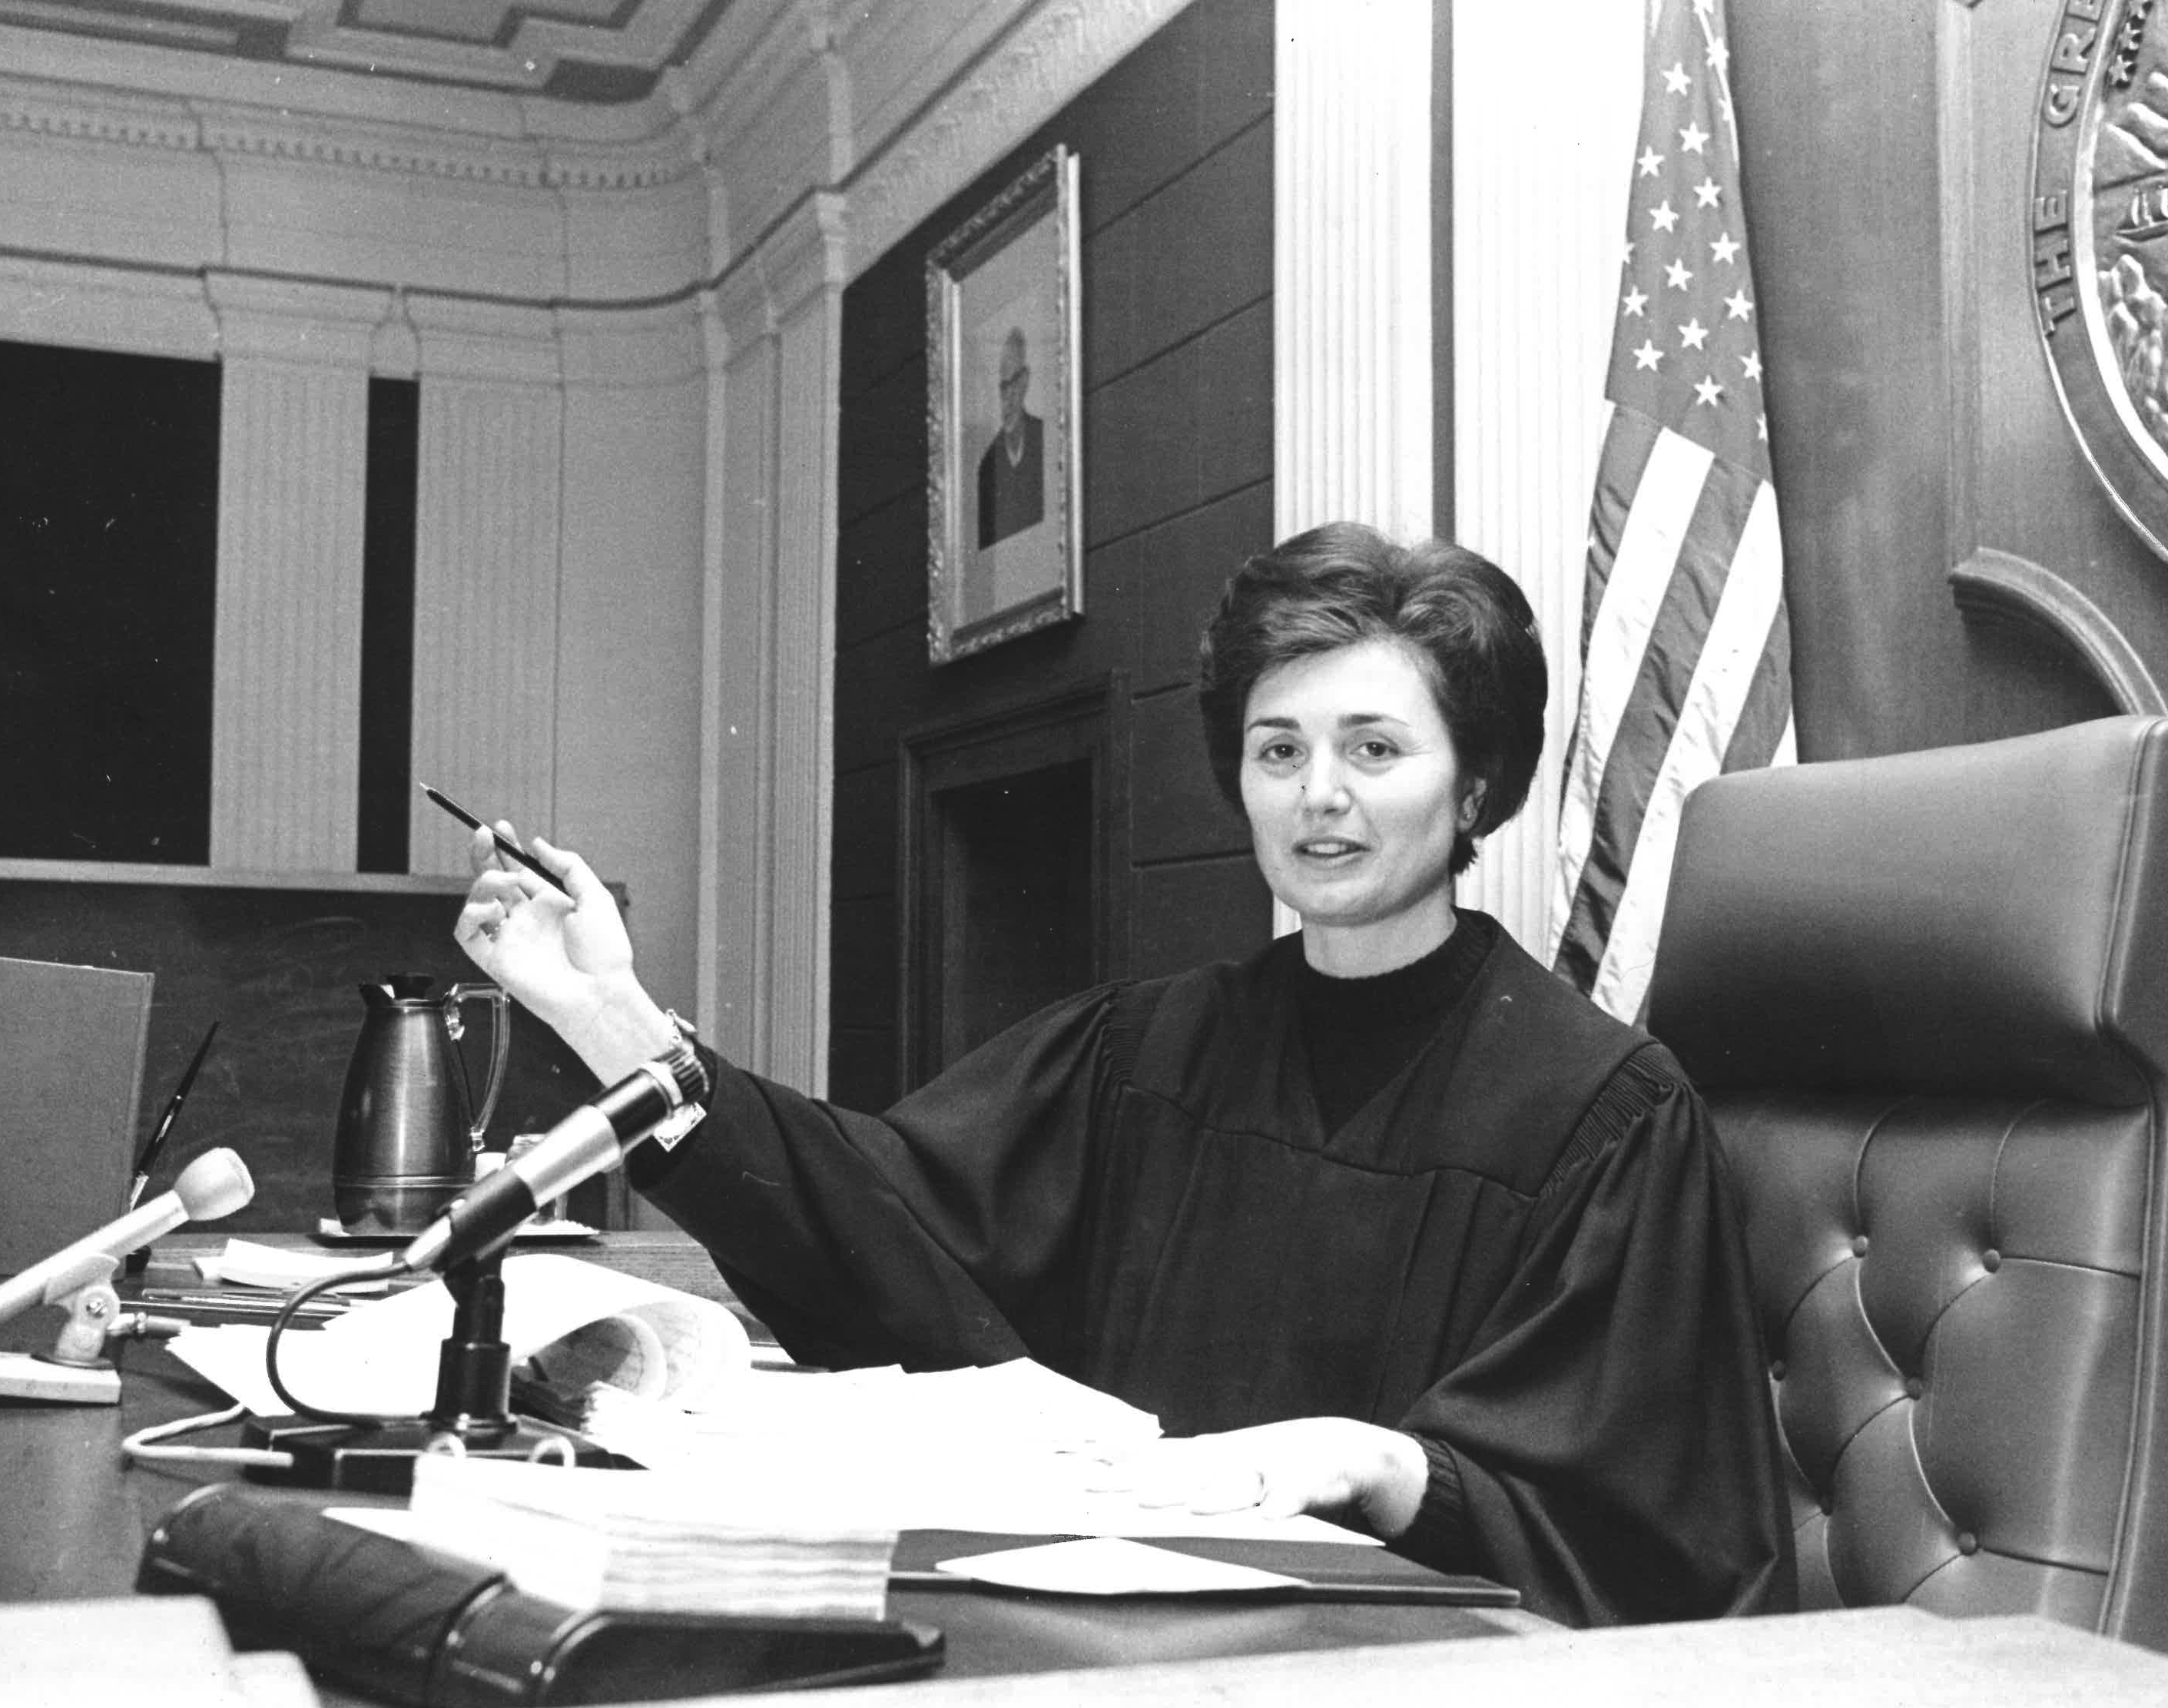 A woman in a judge's robe sits at a bench with a pen, papers, a microphone, and the U.S. flag behind her.